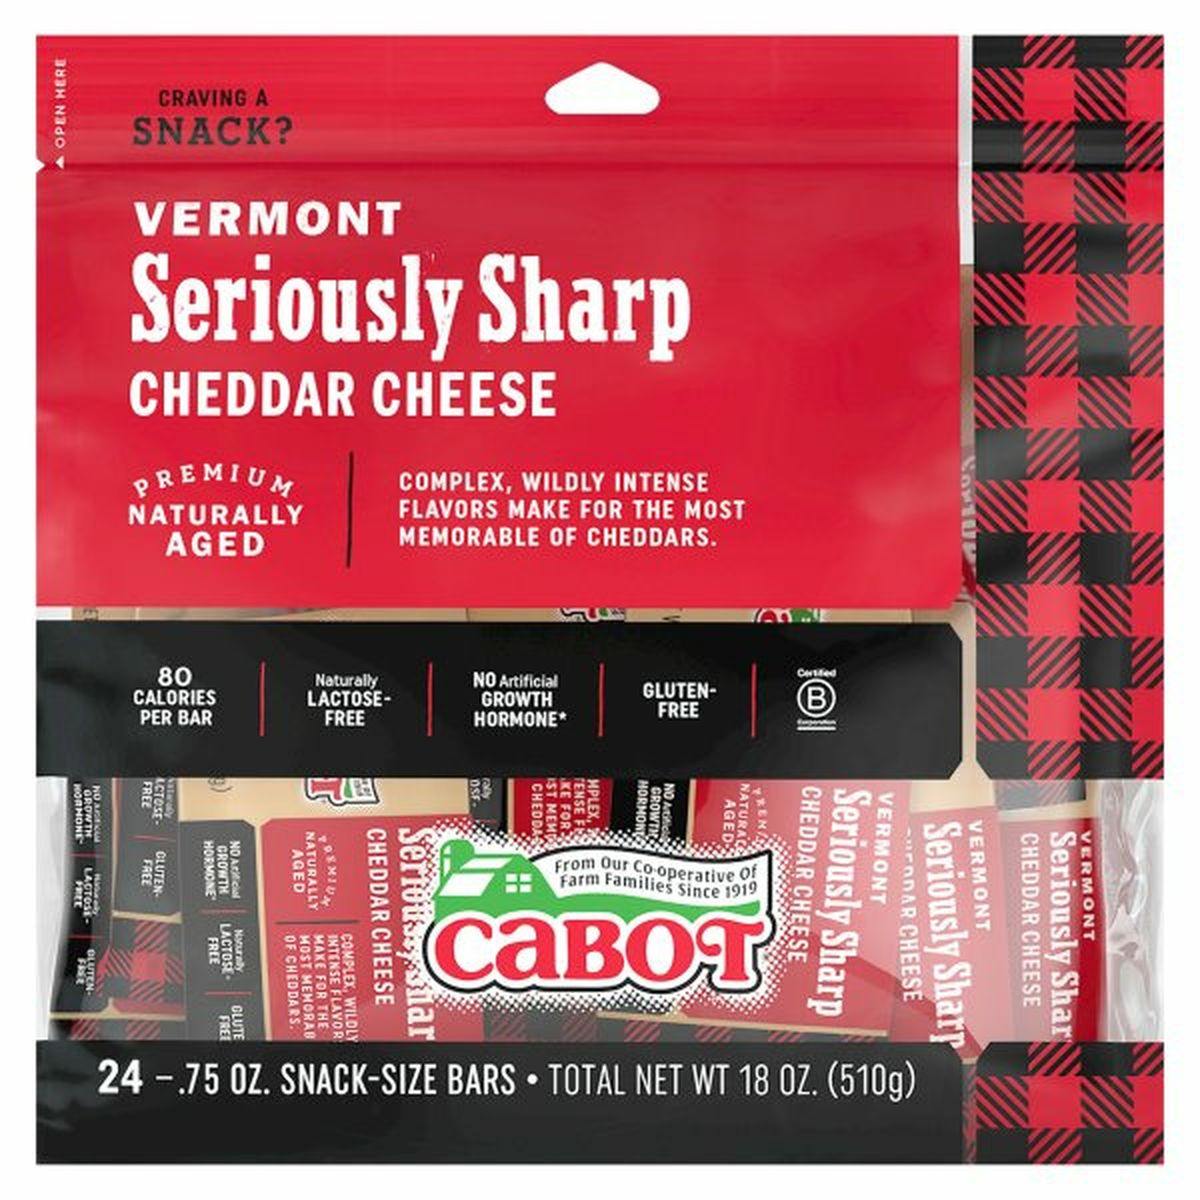 Calories in Cabot Cheese, Vermont Seriously Sharp Cheddar, Snack-Size Bars